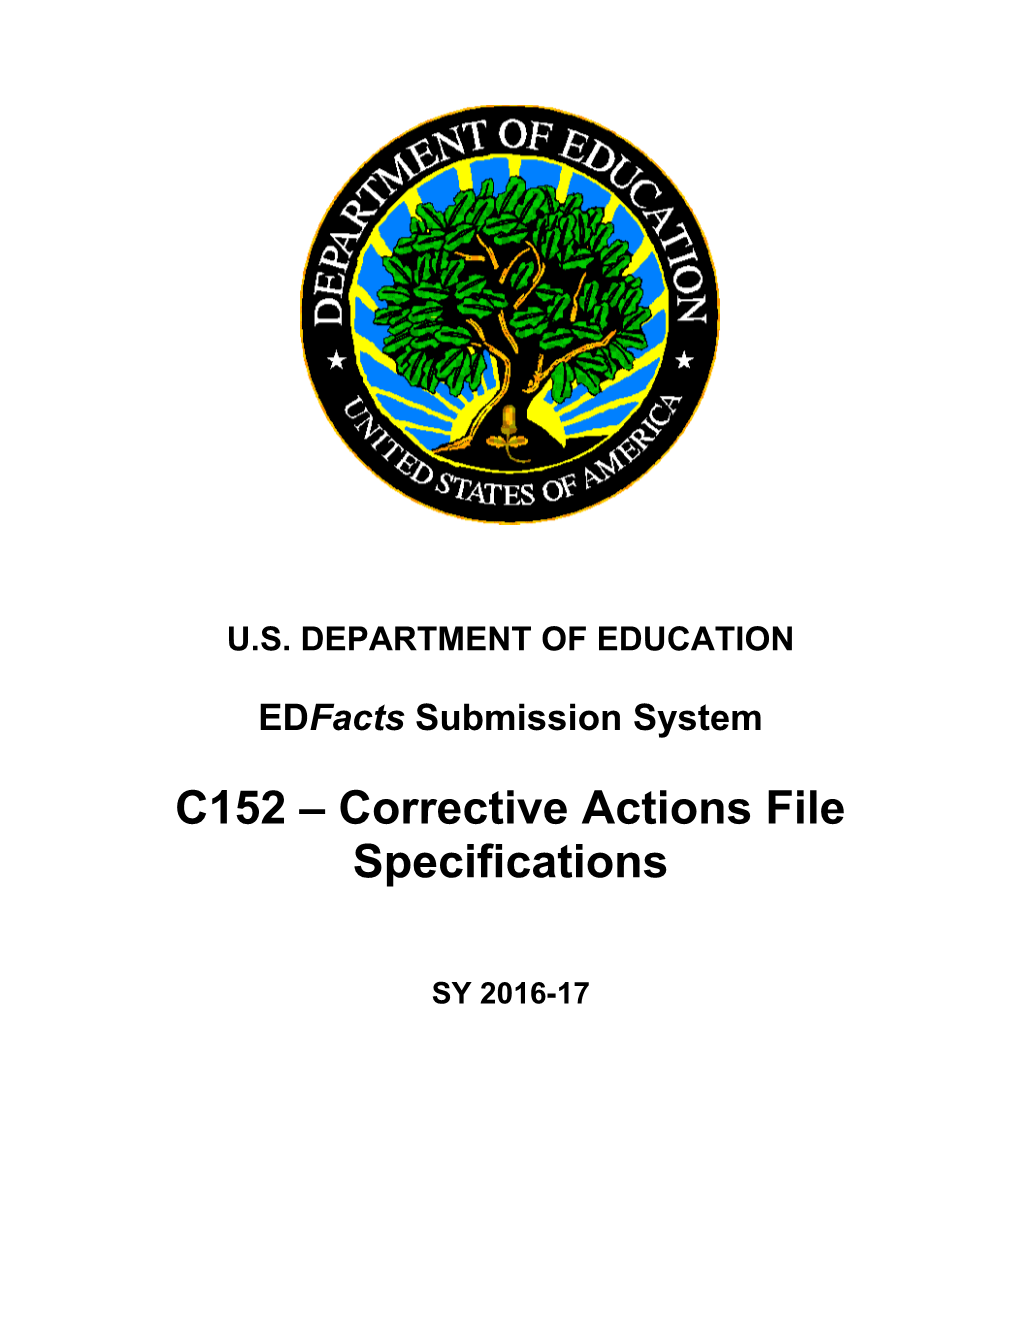 Corrective Actions File Specifications